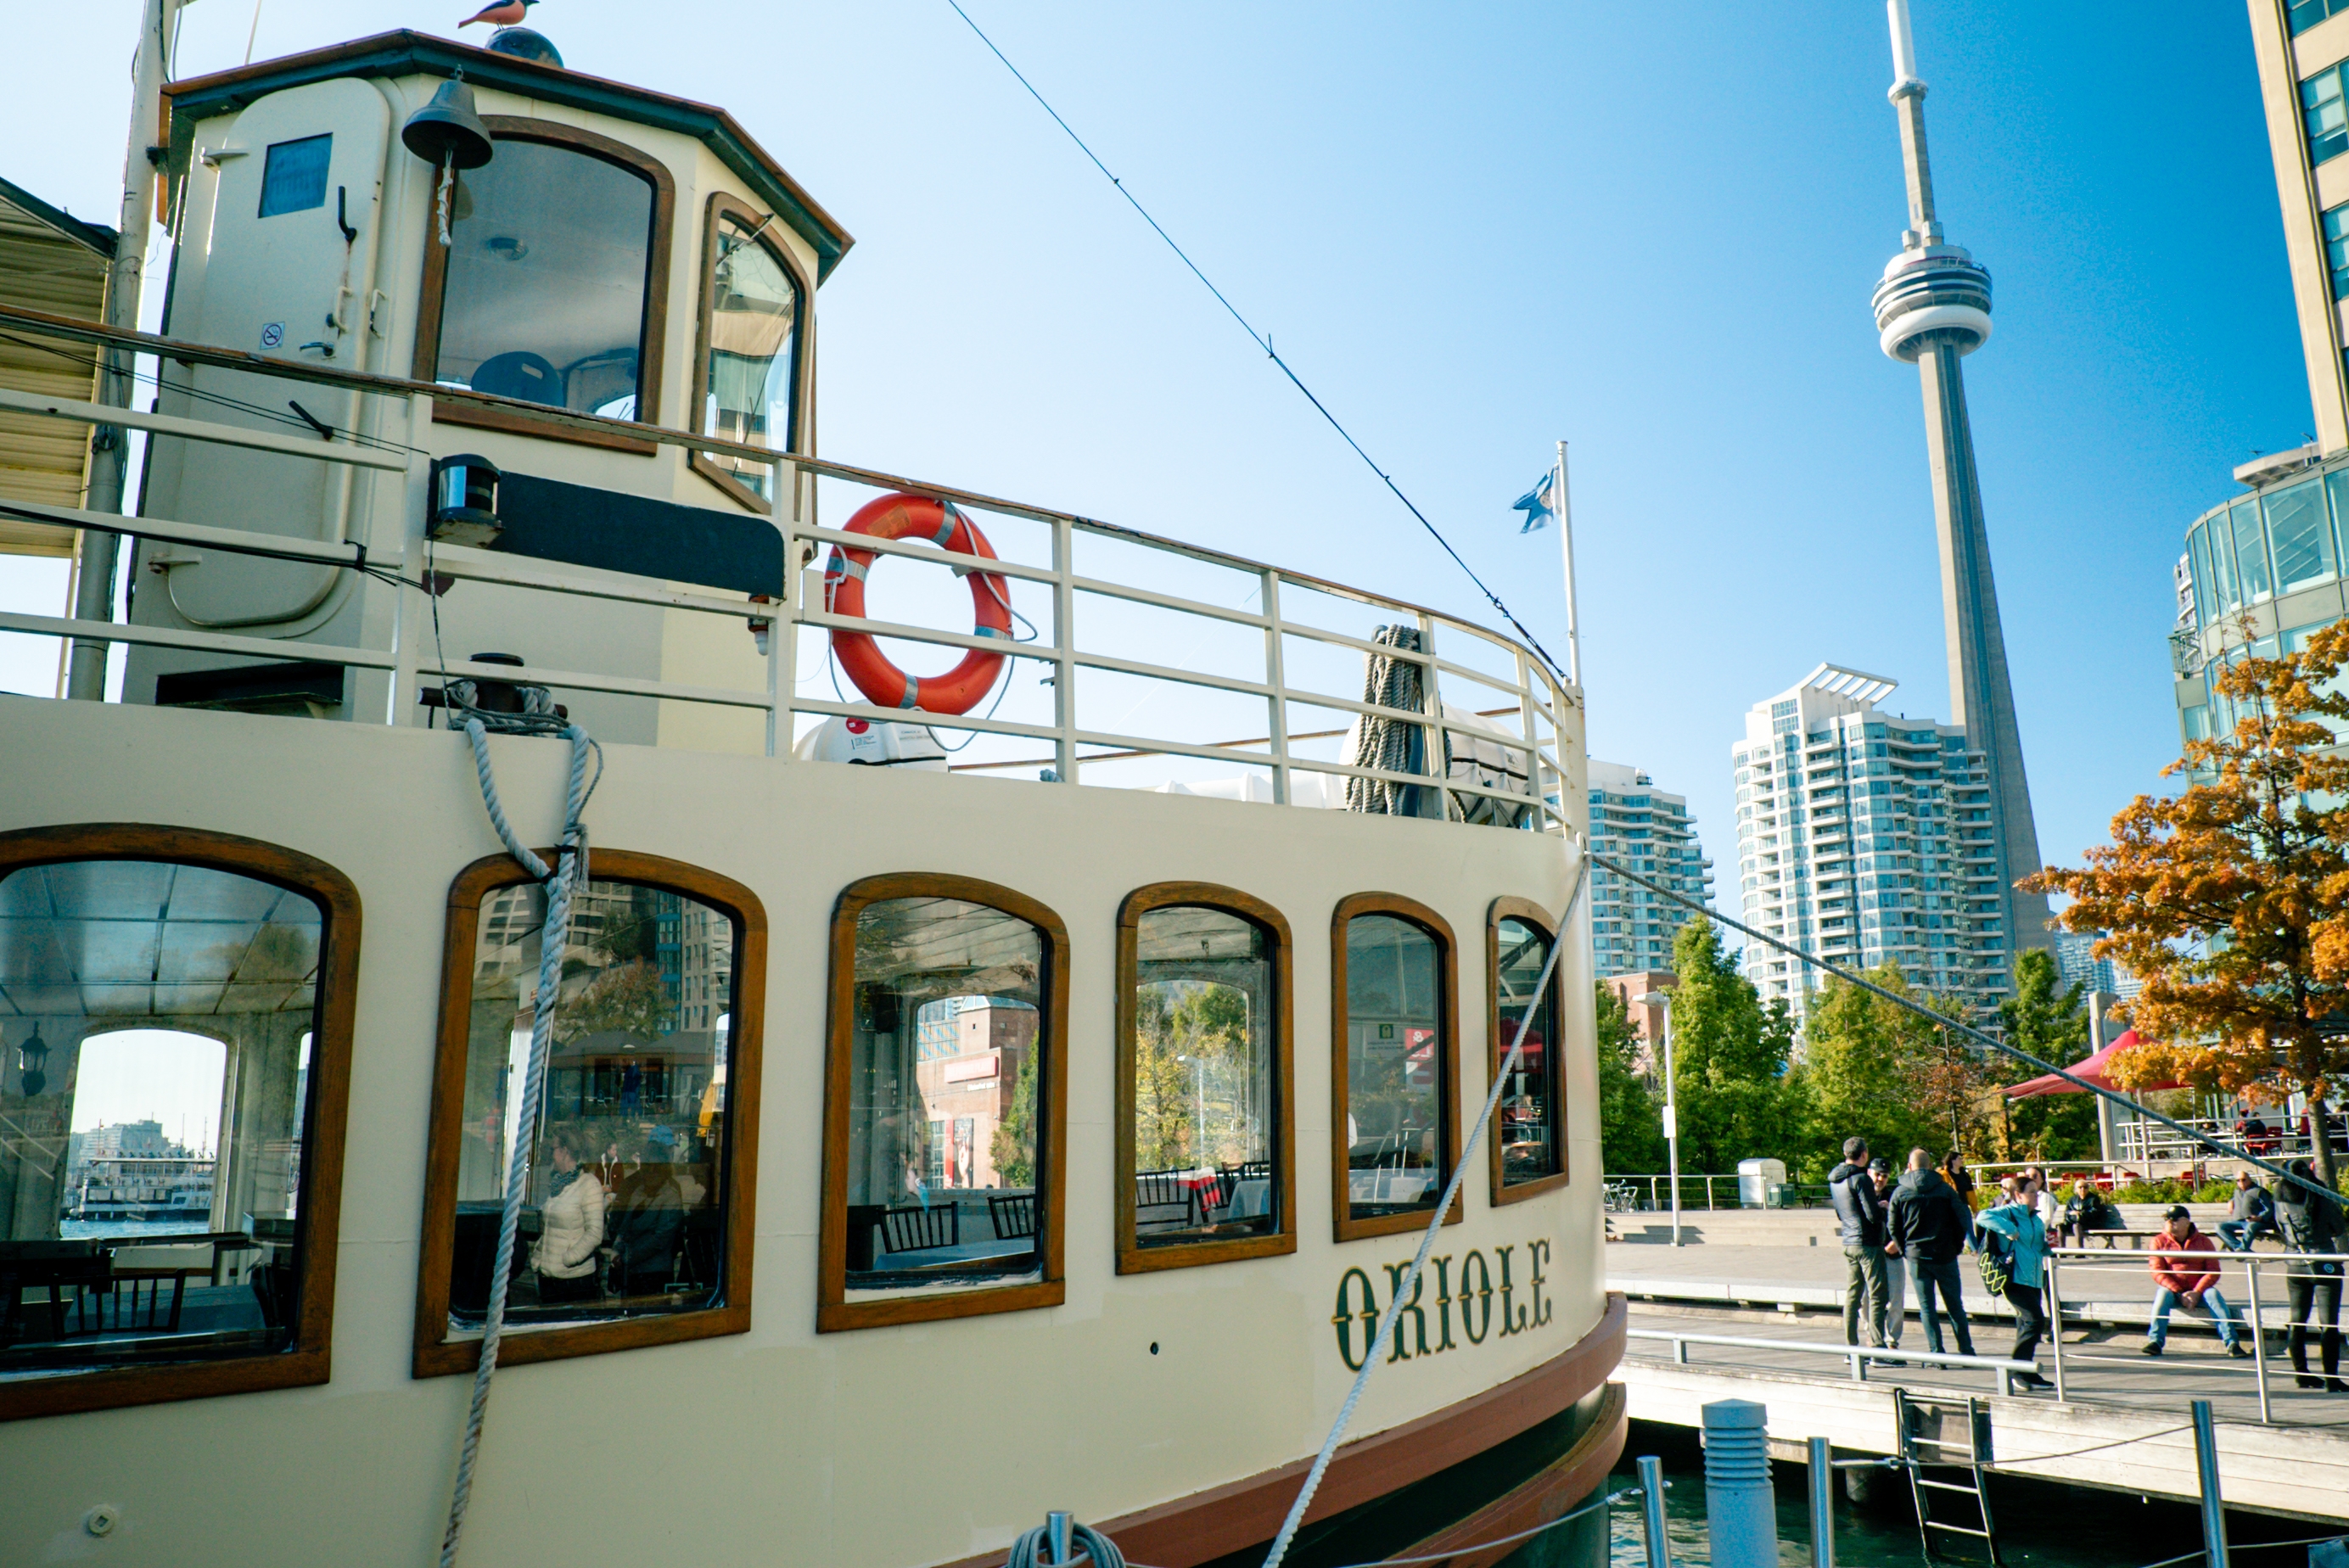 https://res.cloudinary.com/see-sight-tours/image/upload/v1581436593/toronto-harbour-cruise-boat.jpg